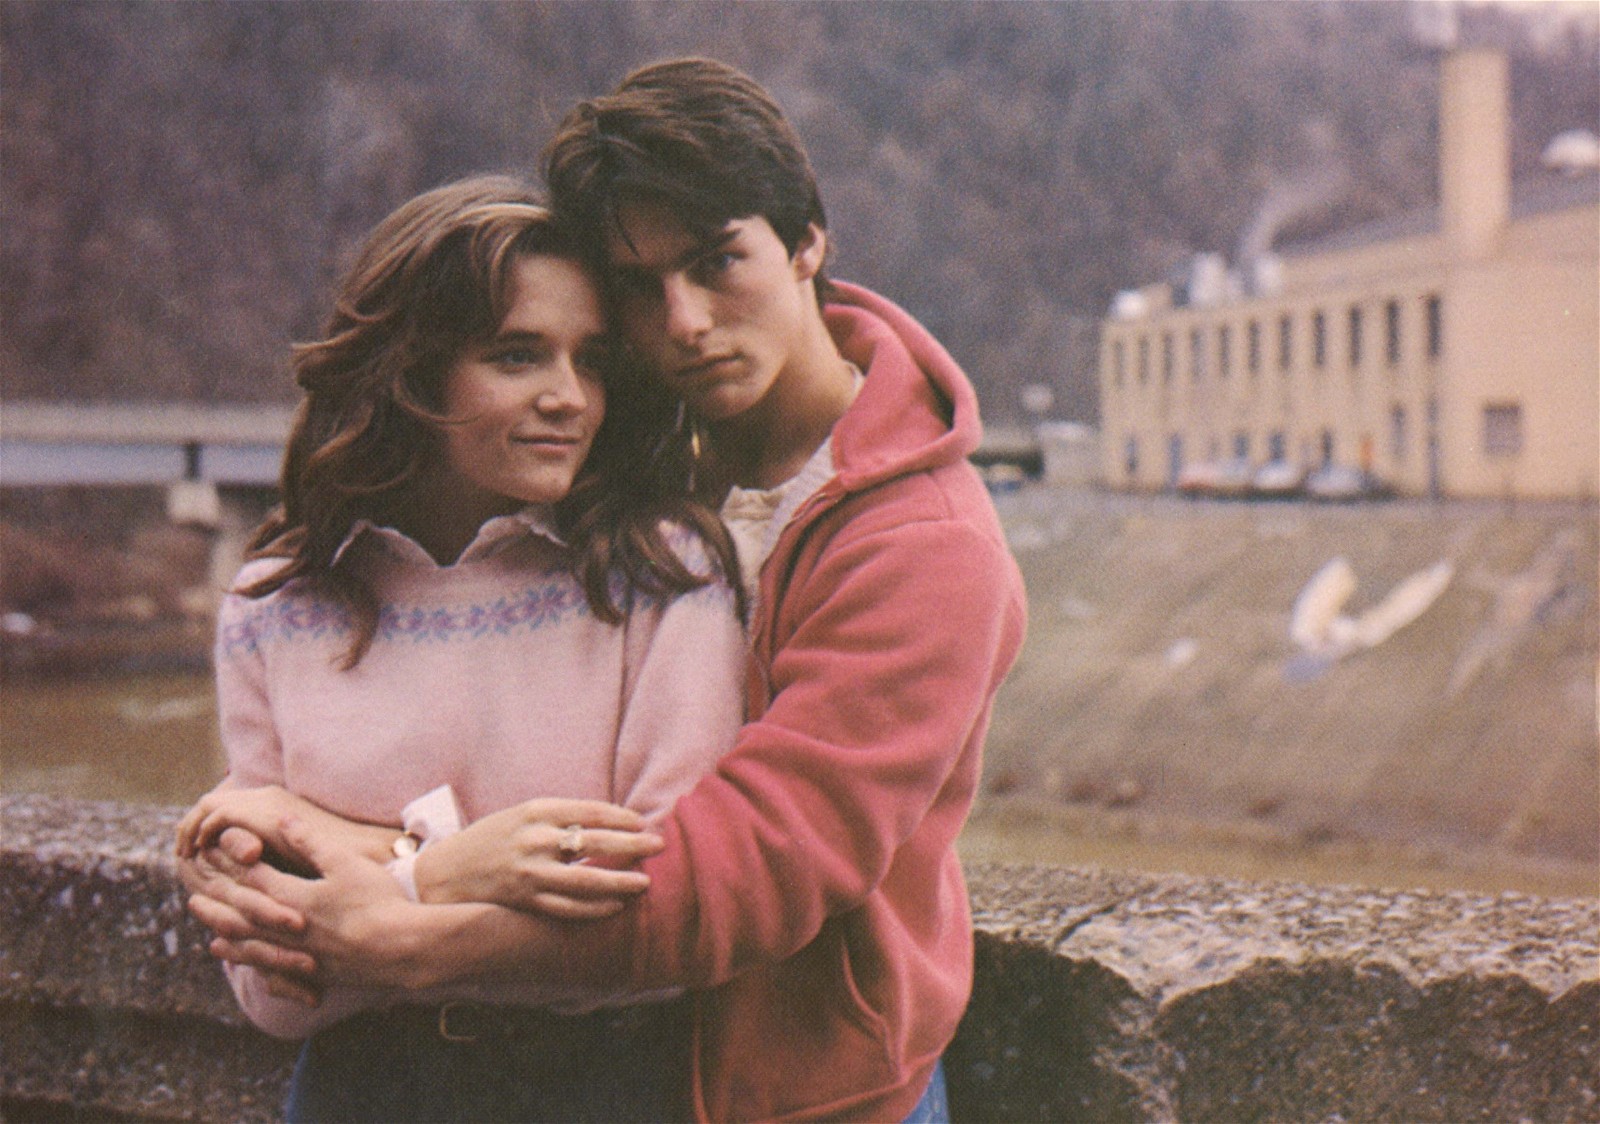 Tom Cruise with Lea Thompson in a still from All the Right Moves (1983) | Lucille Ball Productions